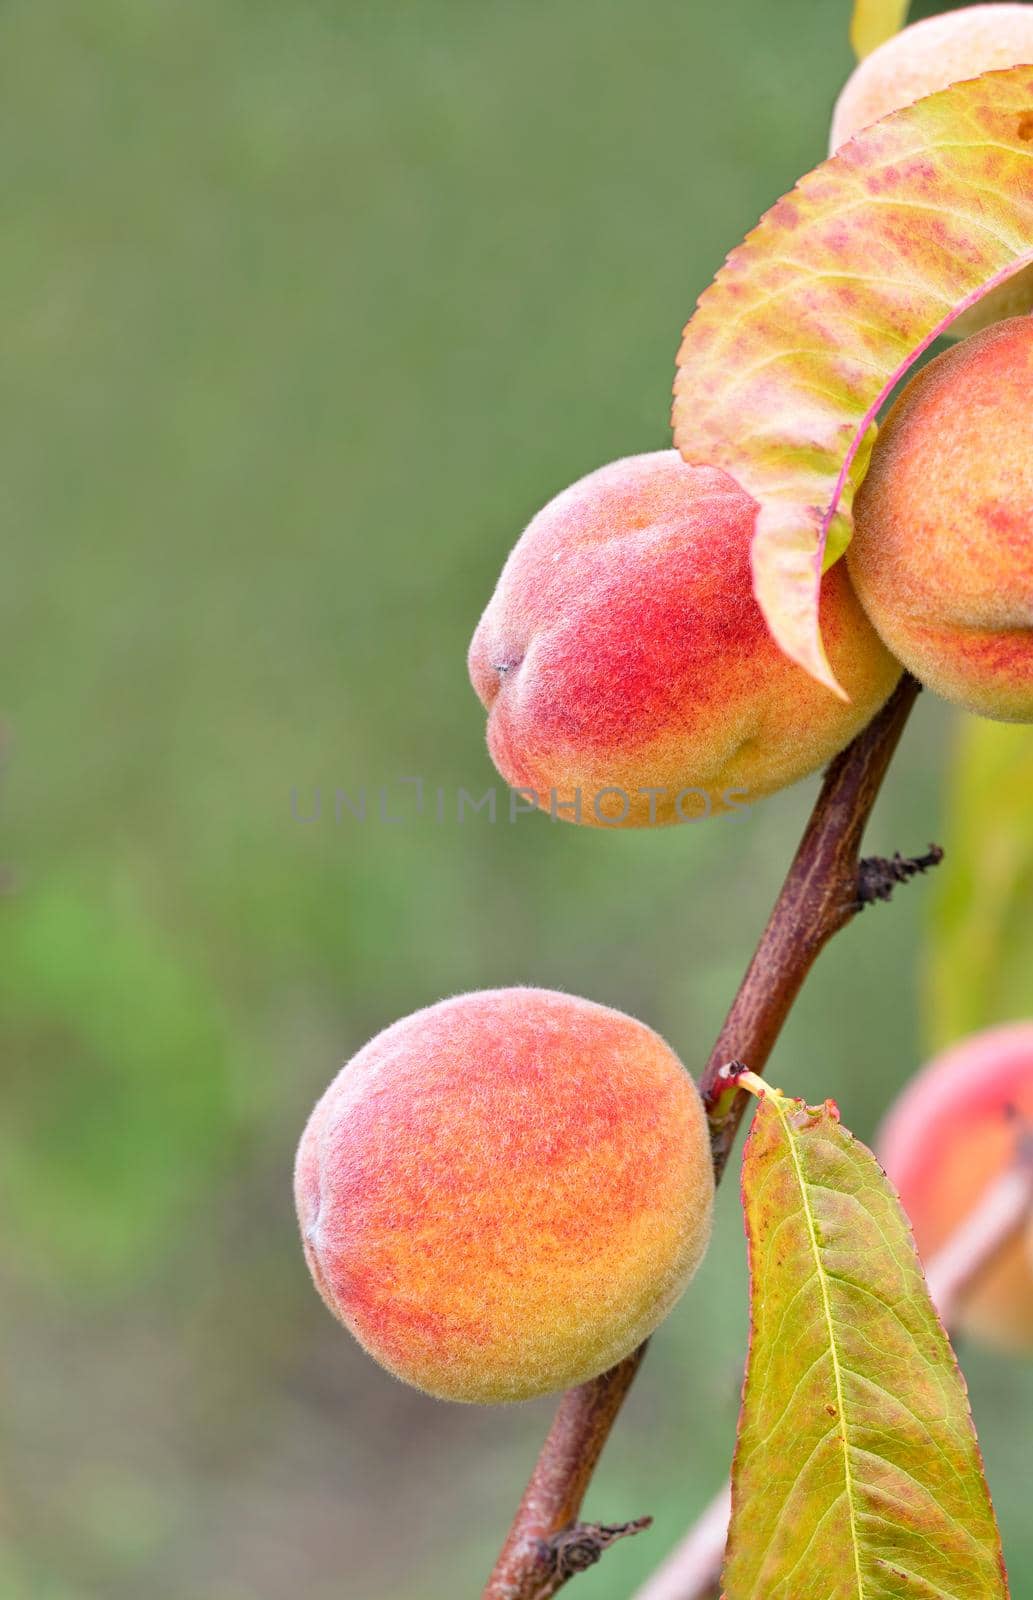 Sweet ripe peaches grow on a young tree branch, close-up. by Sergii